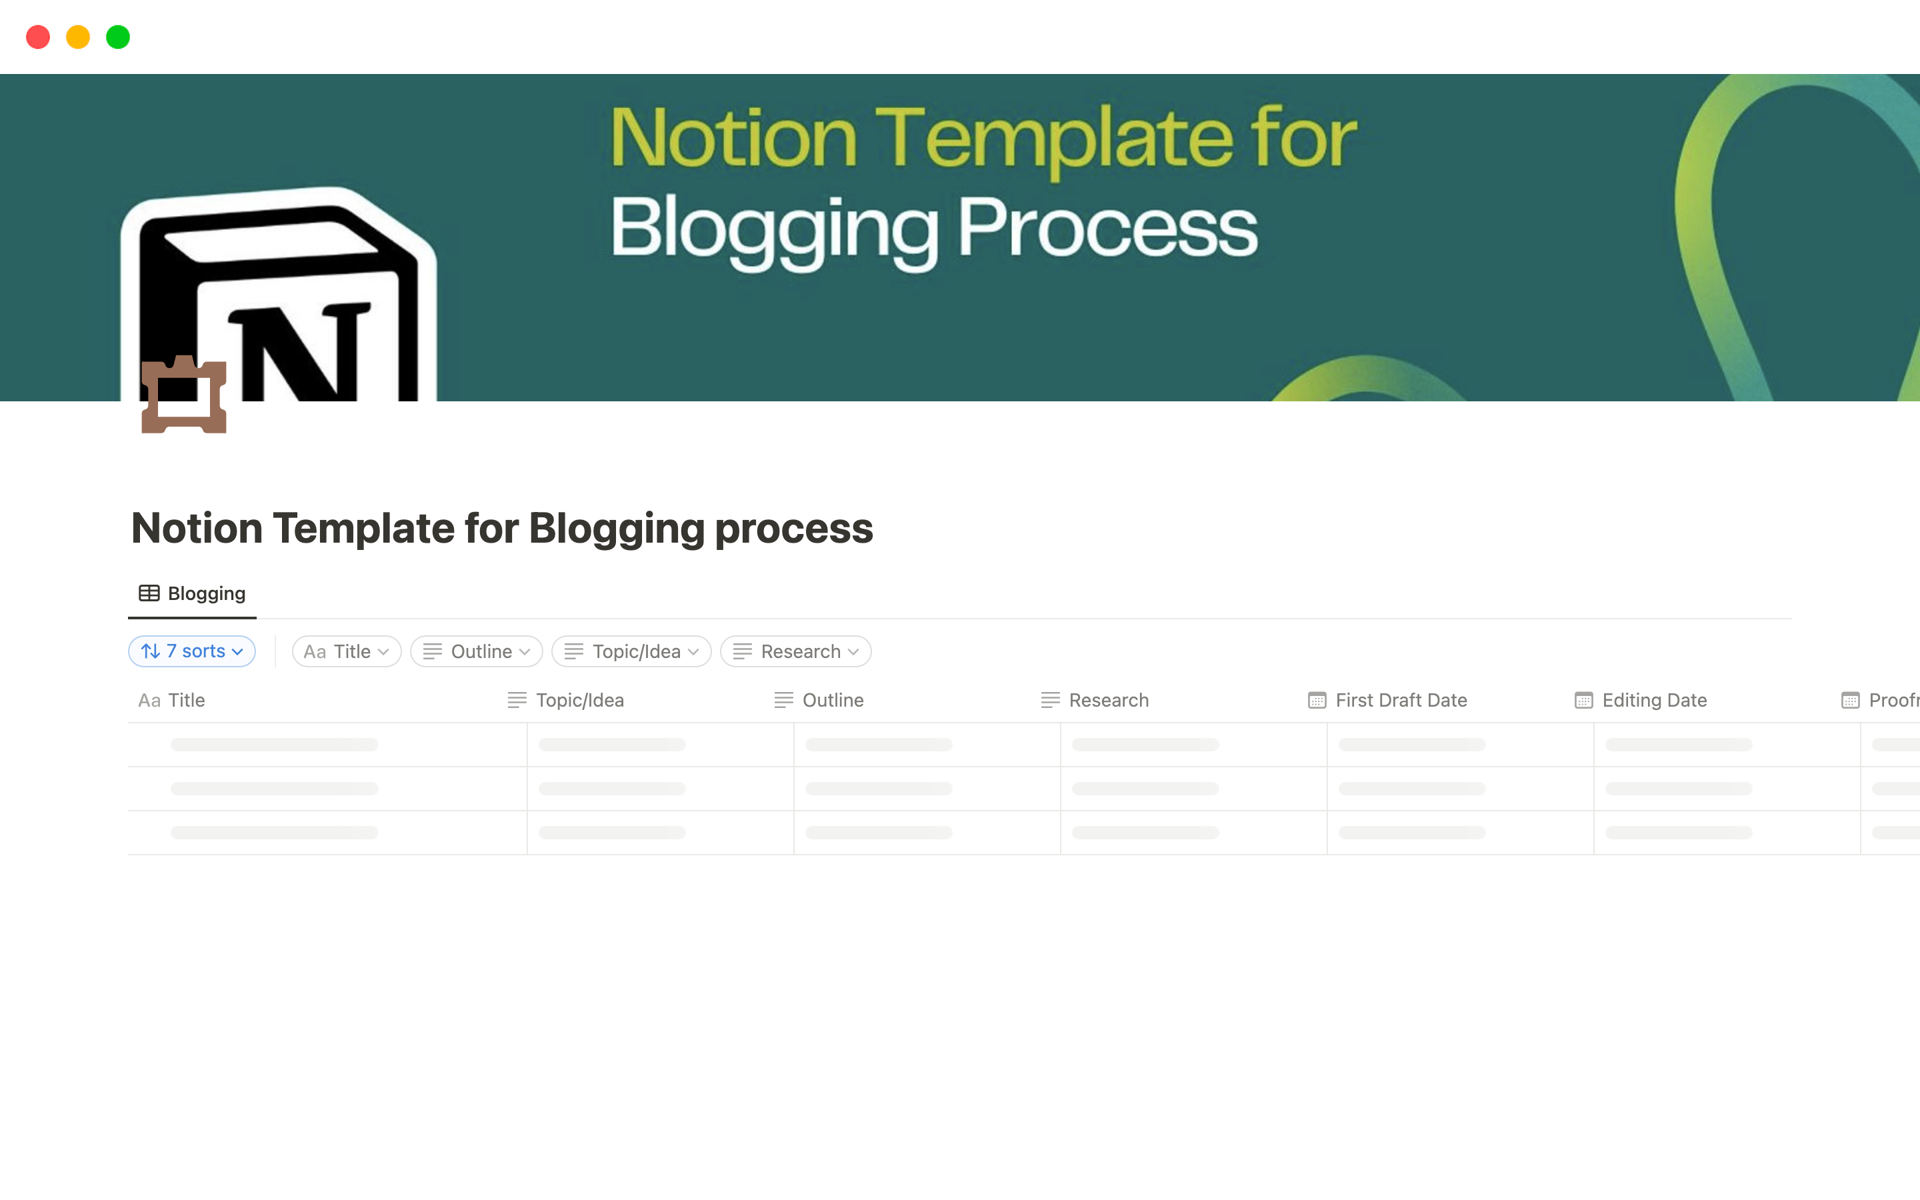 Streamline your blogging journey with our comprehensive Notion template for Blogging Process. From ideation to publication, stay organized, track progress, and boost productivity. Take control of your blogging workflow and achieve success with our intuitive template.